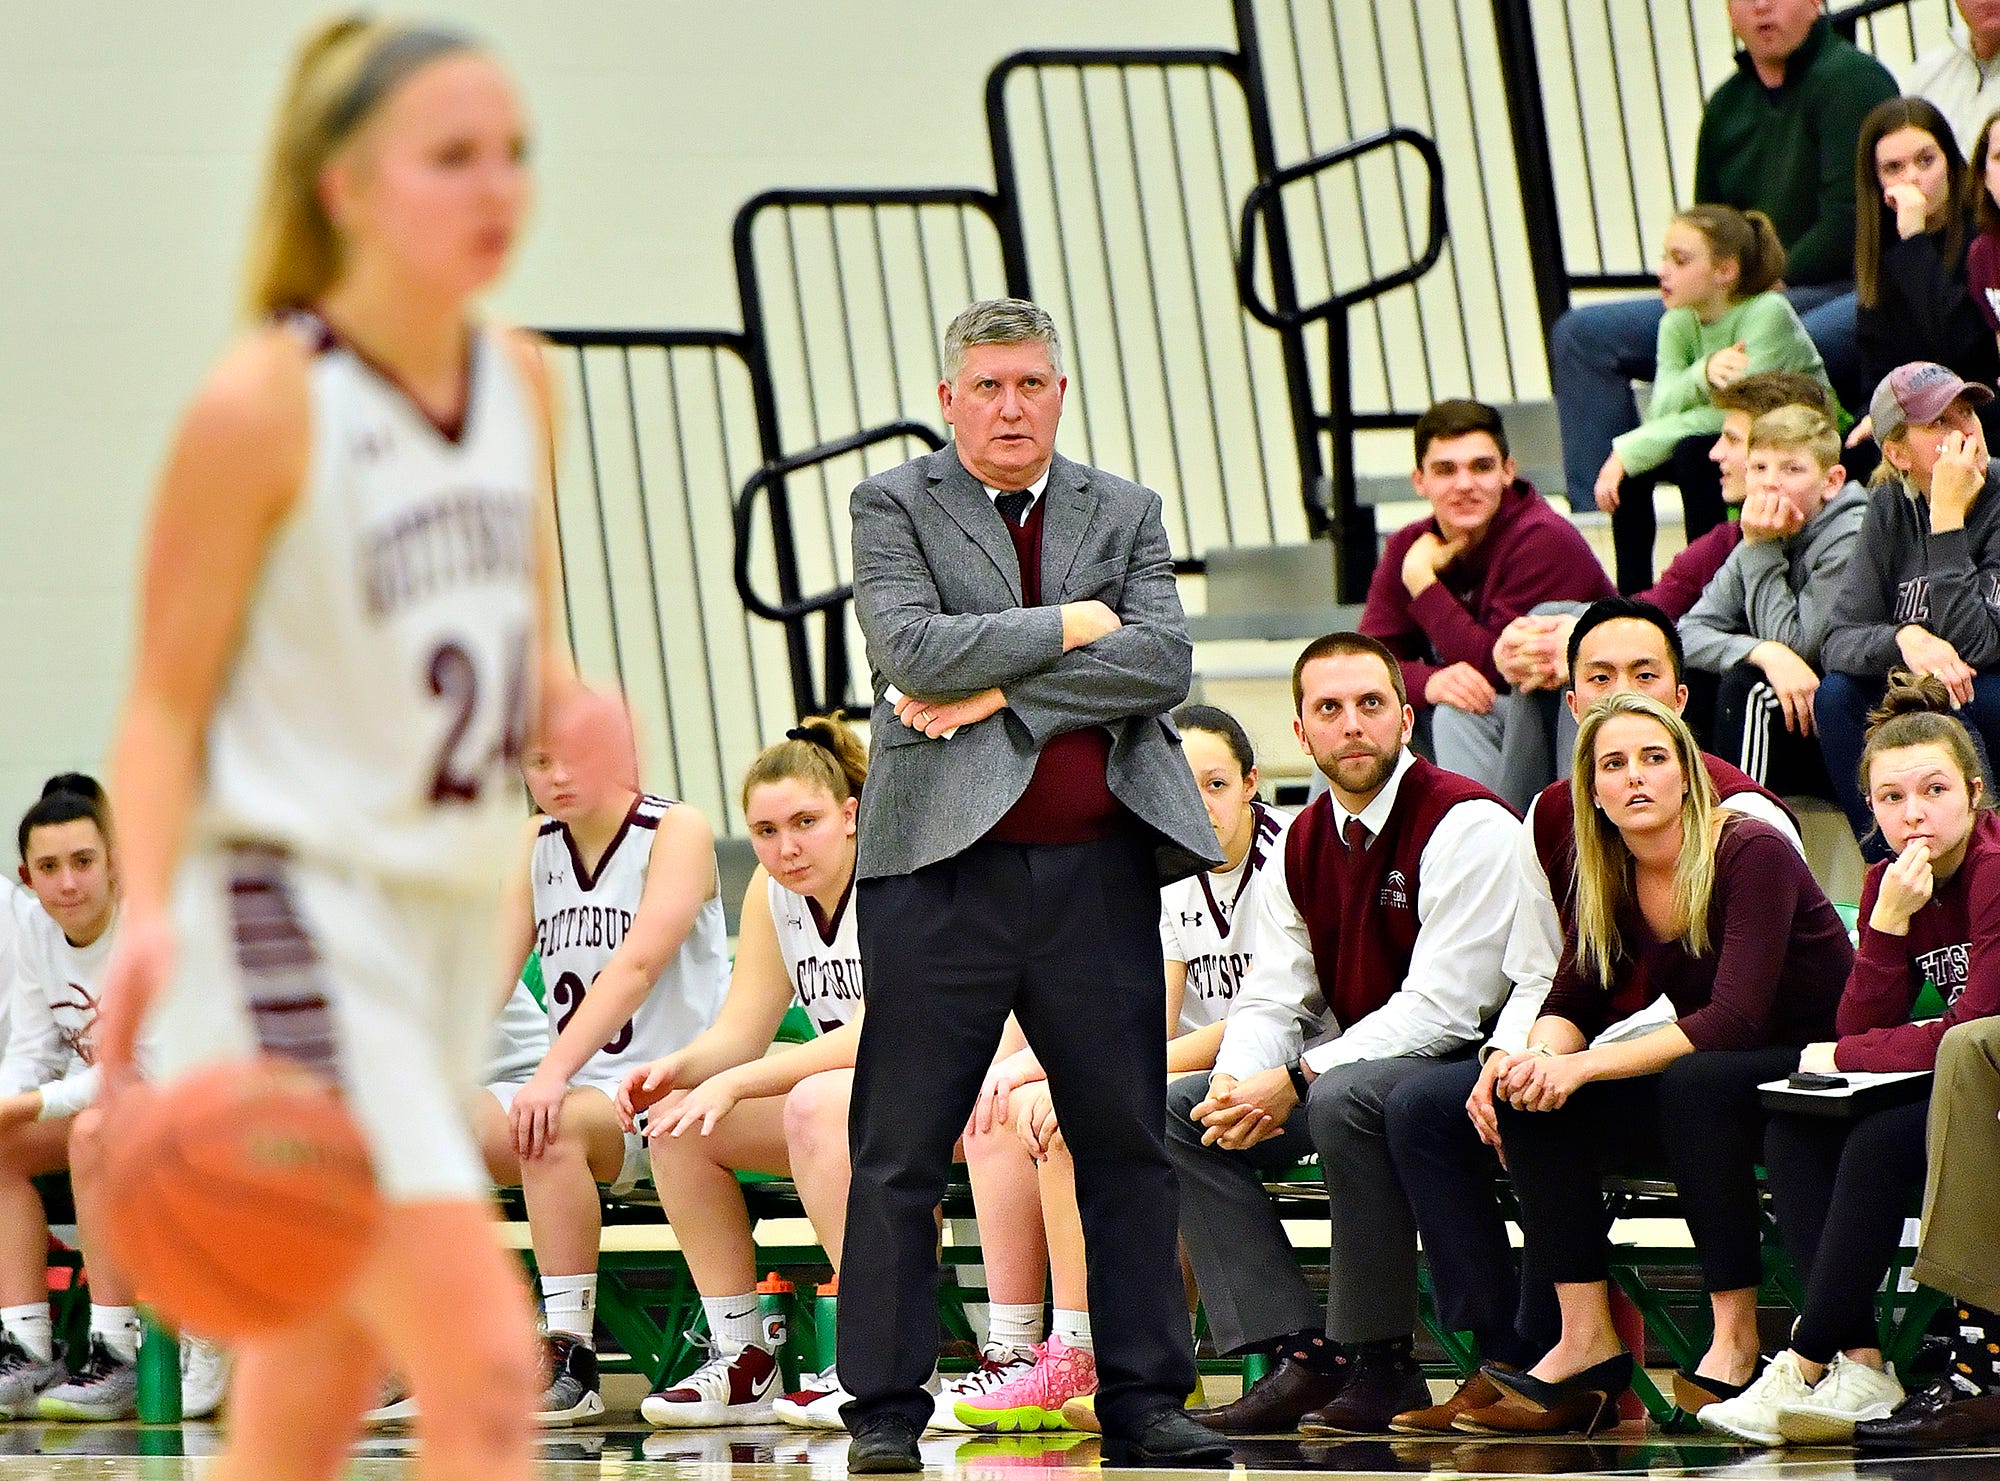 Gettysburg's Head Coach Jeff Bair during YAIAA girls' basketball championship action against Dallastown at Grumbacher Sport and Fitness Center at York College of Pennsylvania in Spring Garden Township, Friday, Feb. 14, 2020. Dallastown would win the game 42-38. Dawn J. Sagert photo